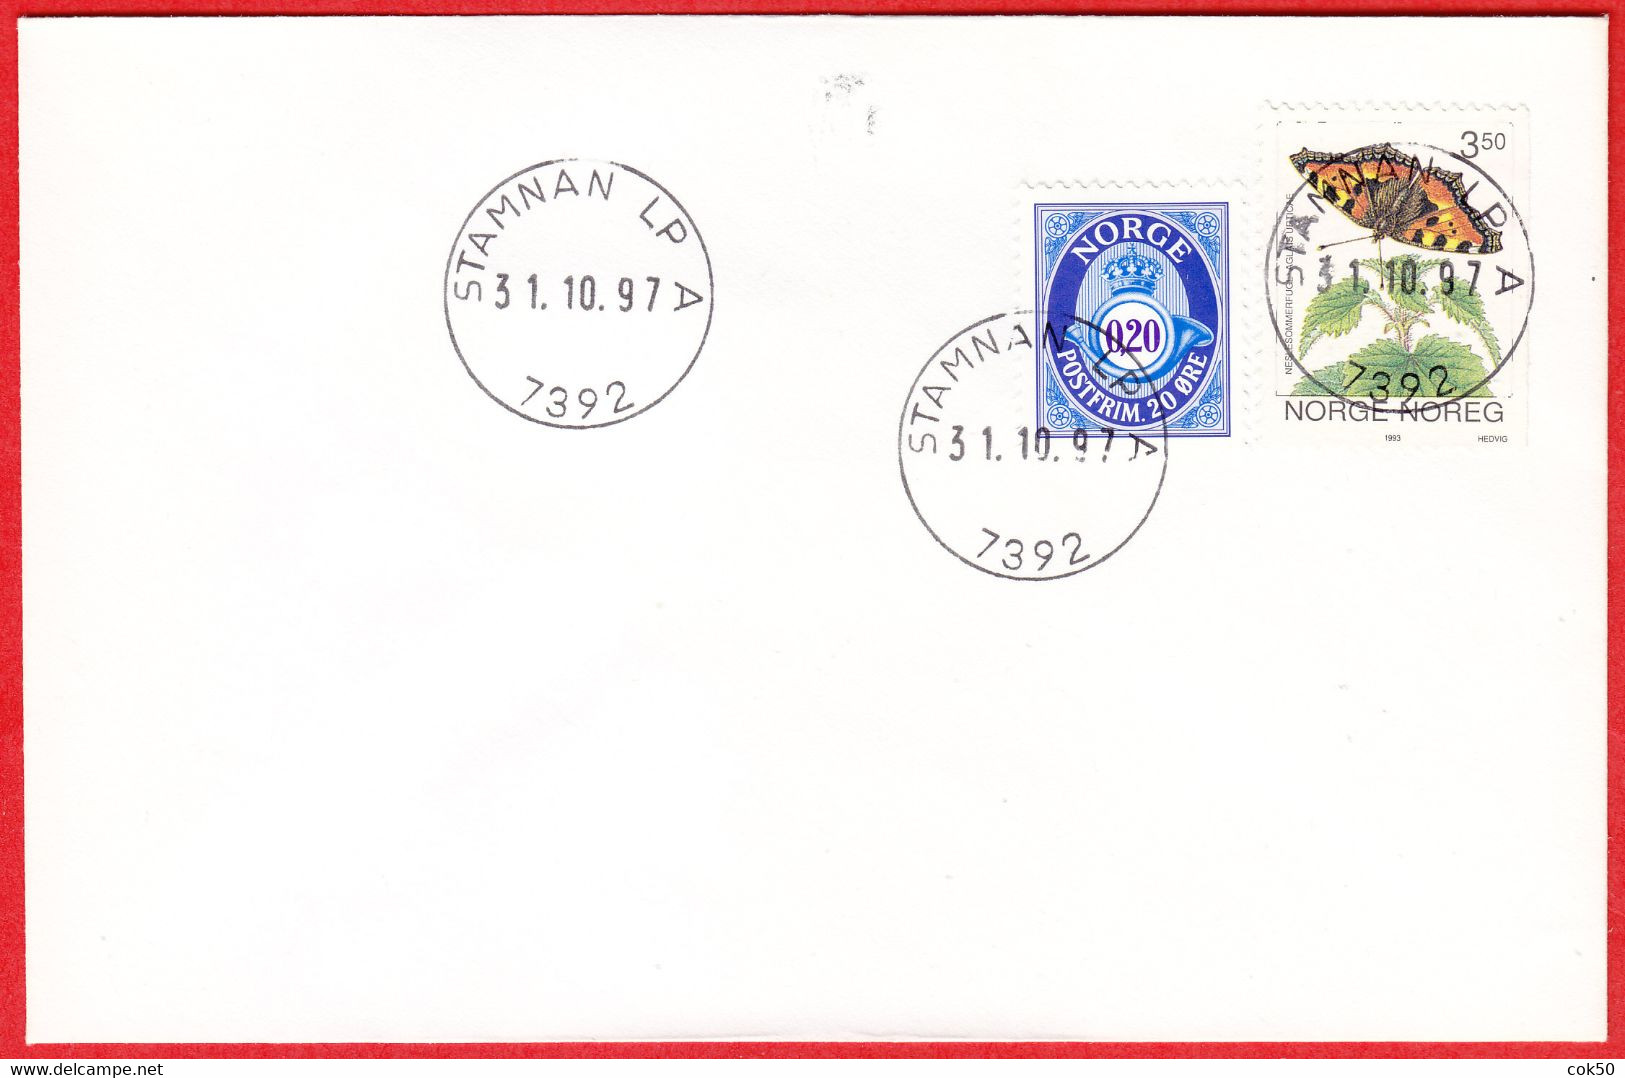 NORWAY -  7392 STAMNAN LP A (Trøndelag County) - Last Day/postoffice Closed On 1997.10.31 - Lokale Uitgaven